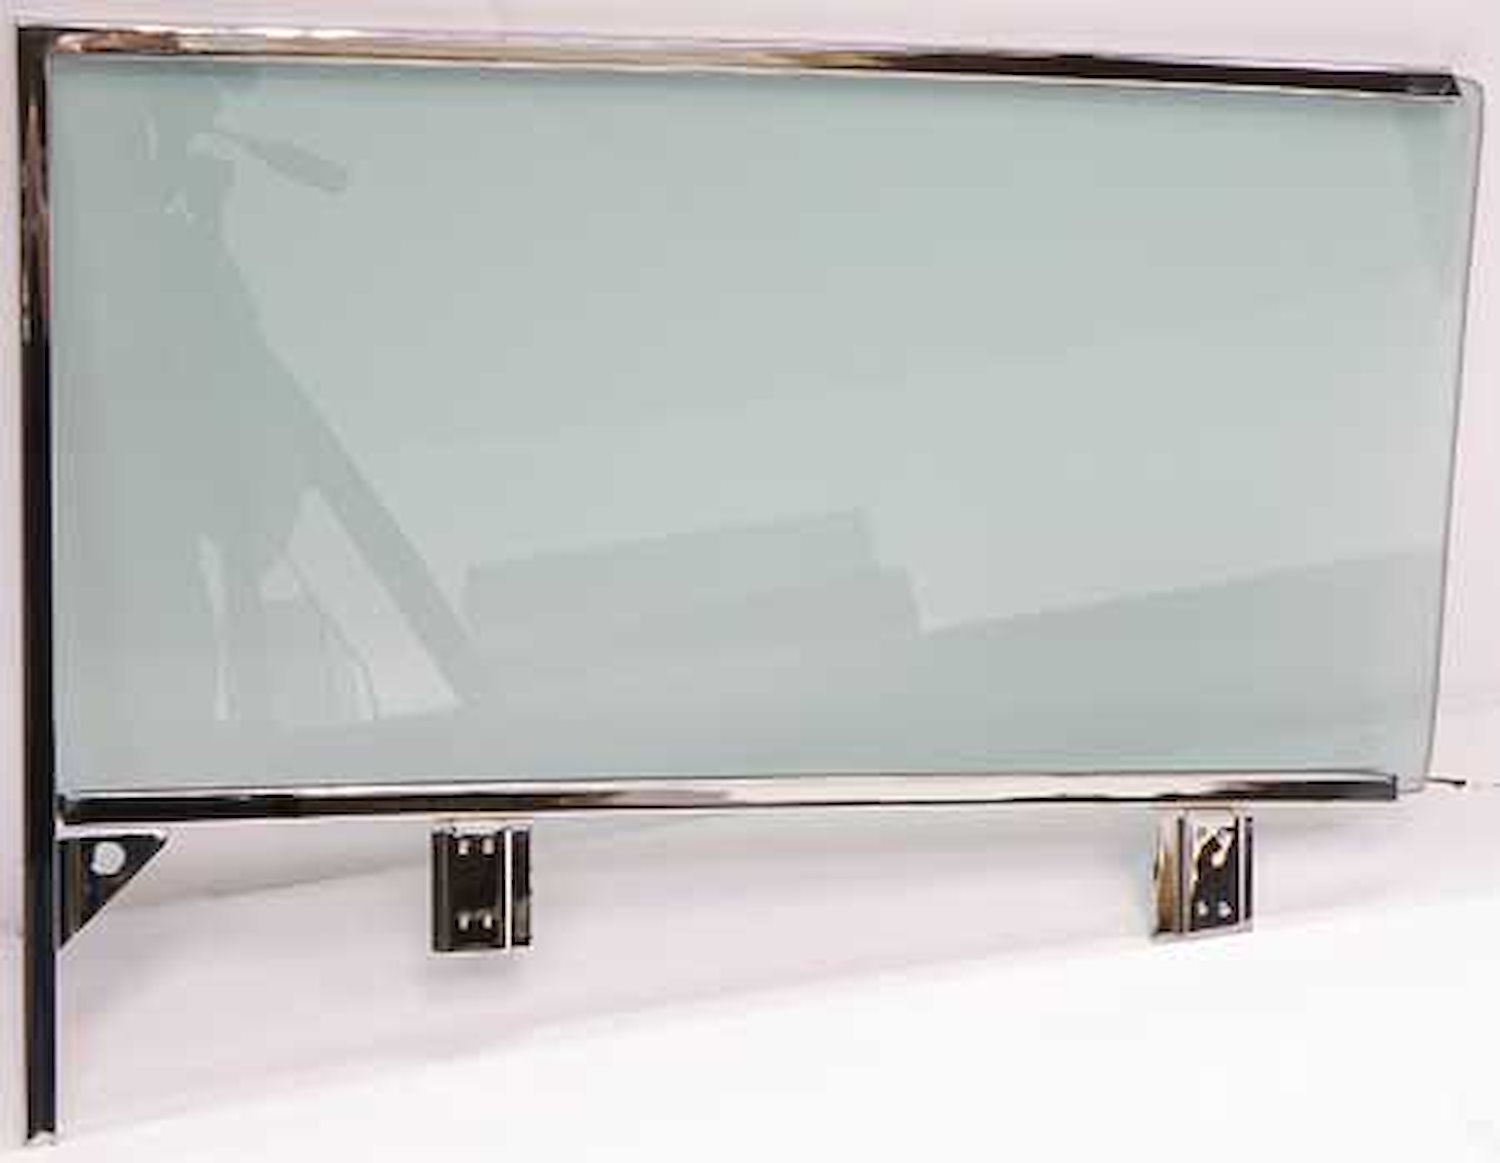 A1608 Door Glass Assembly; 1958 Impala 2 Door Hardtop & Convertible With Tinted Glass; RH